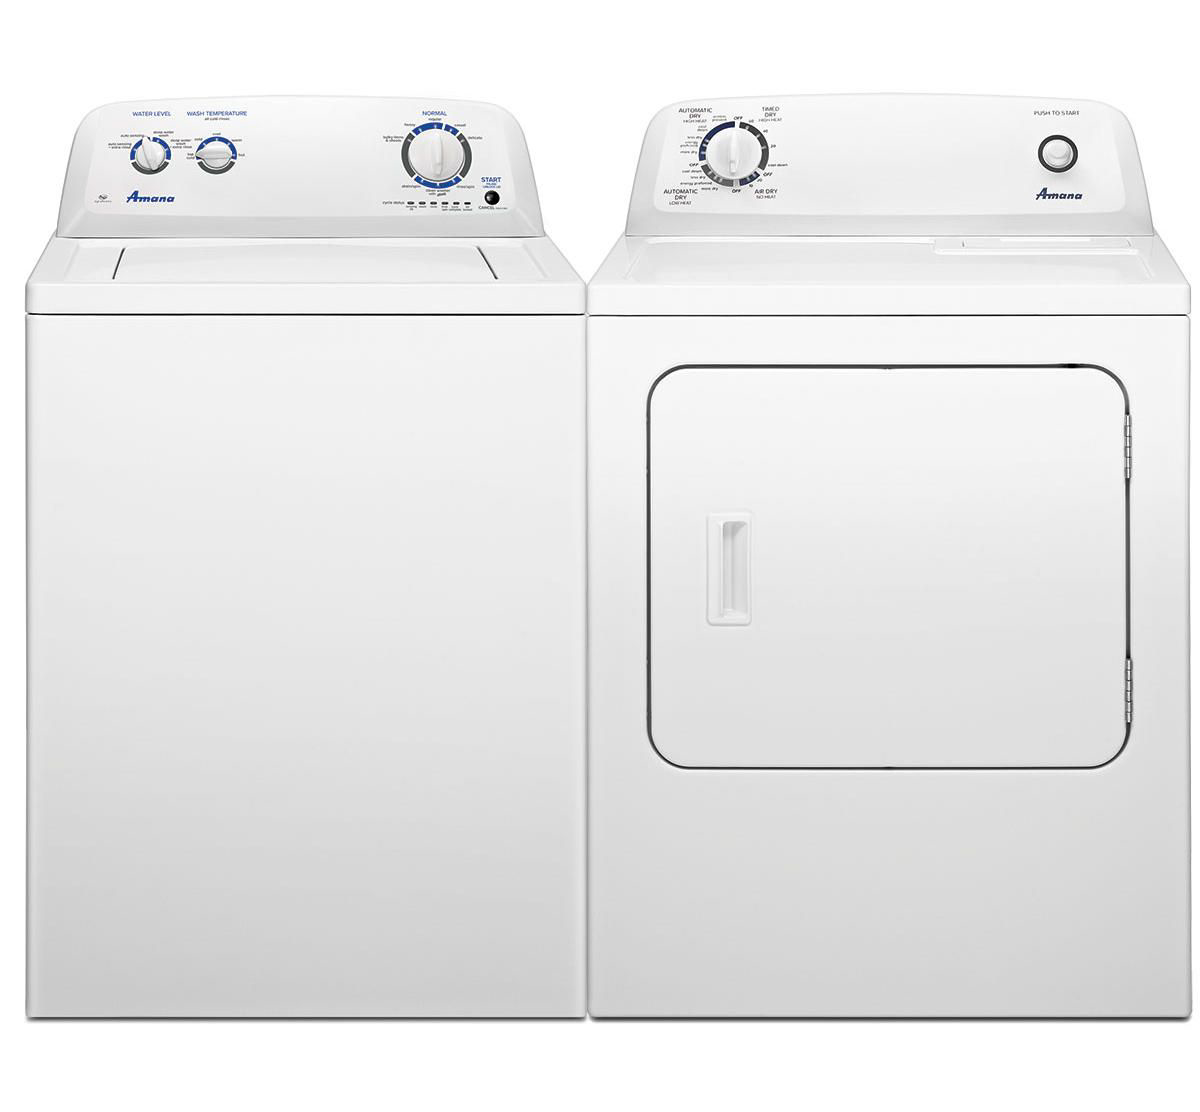 0018276 amana top load washer dryer pair 1200